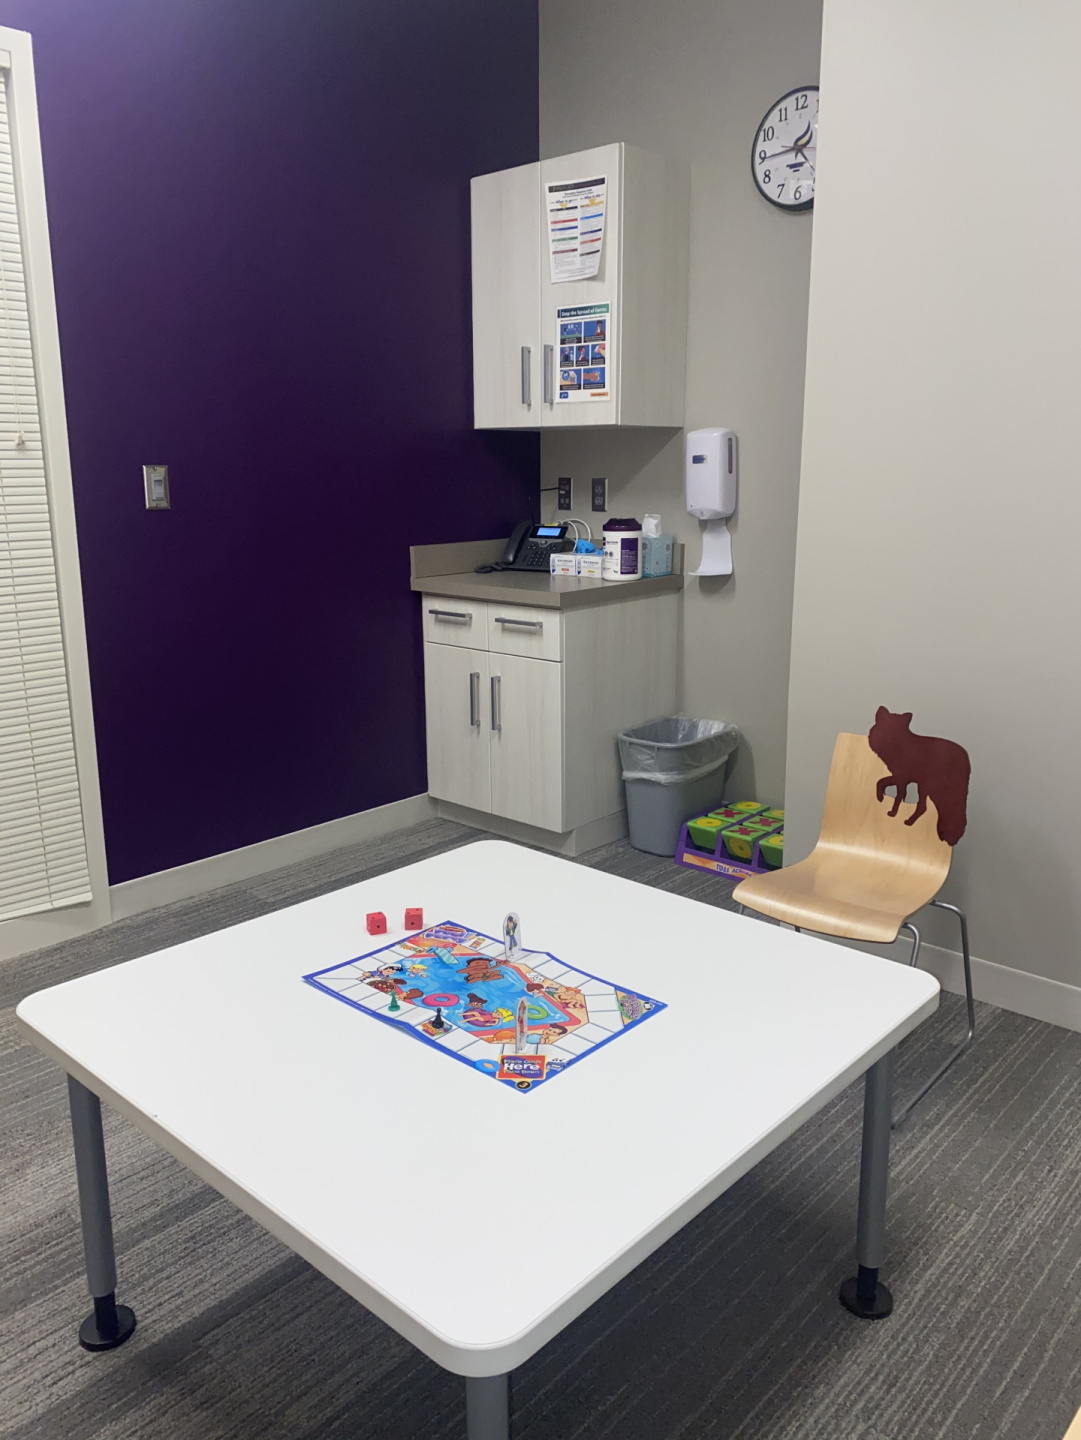 Pediatric therapy room with sink in background and kid friendly table and chair